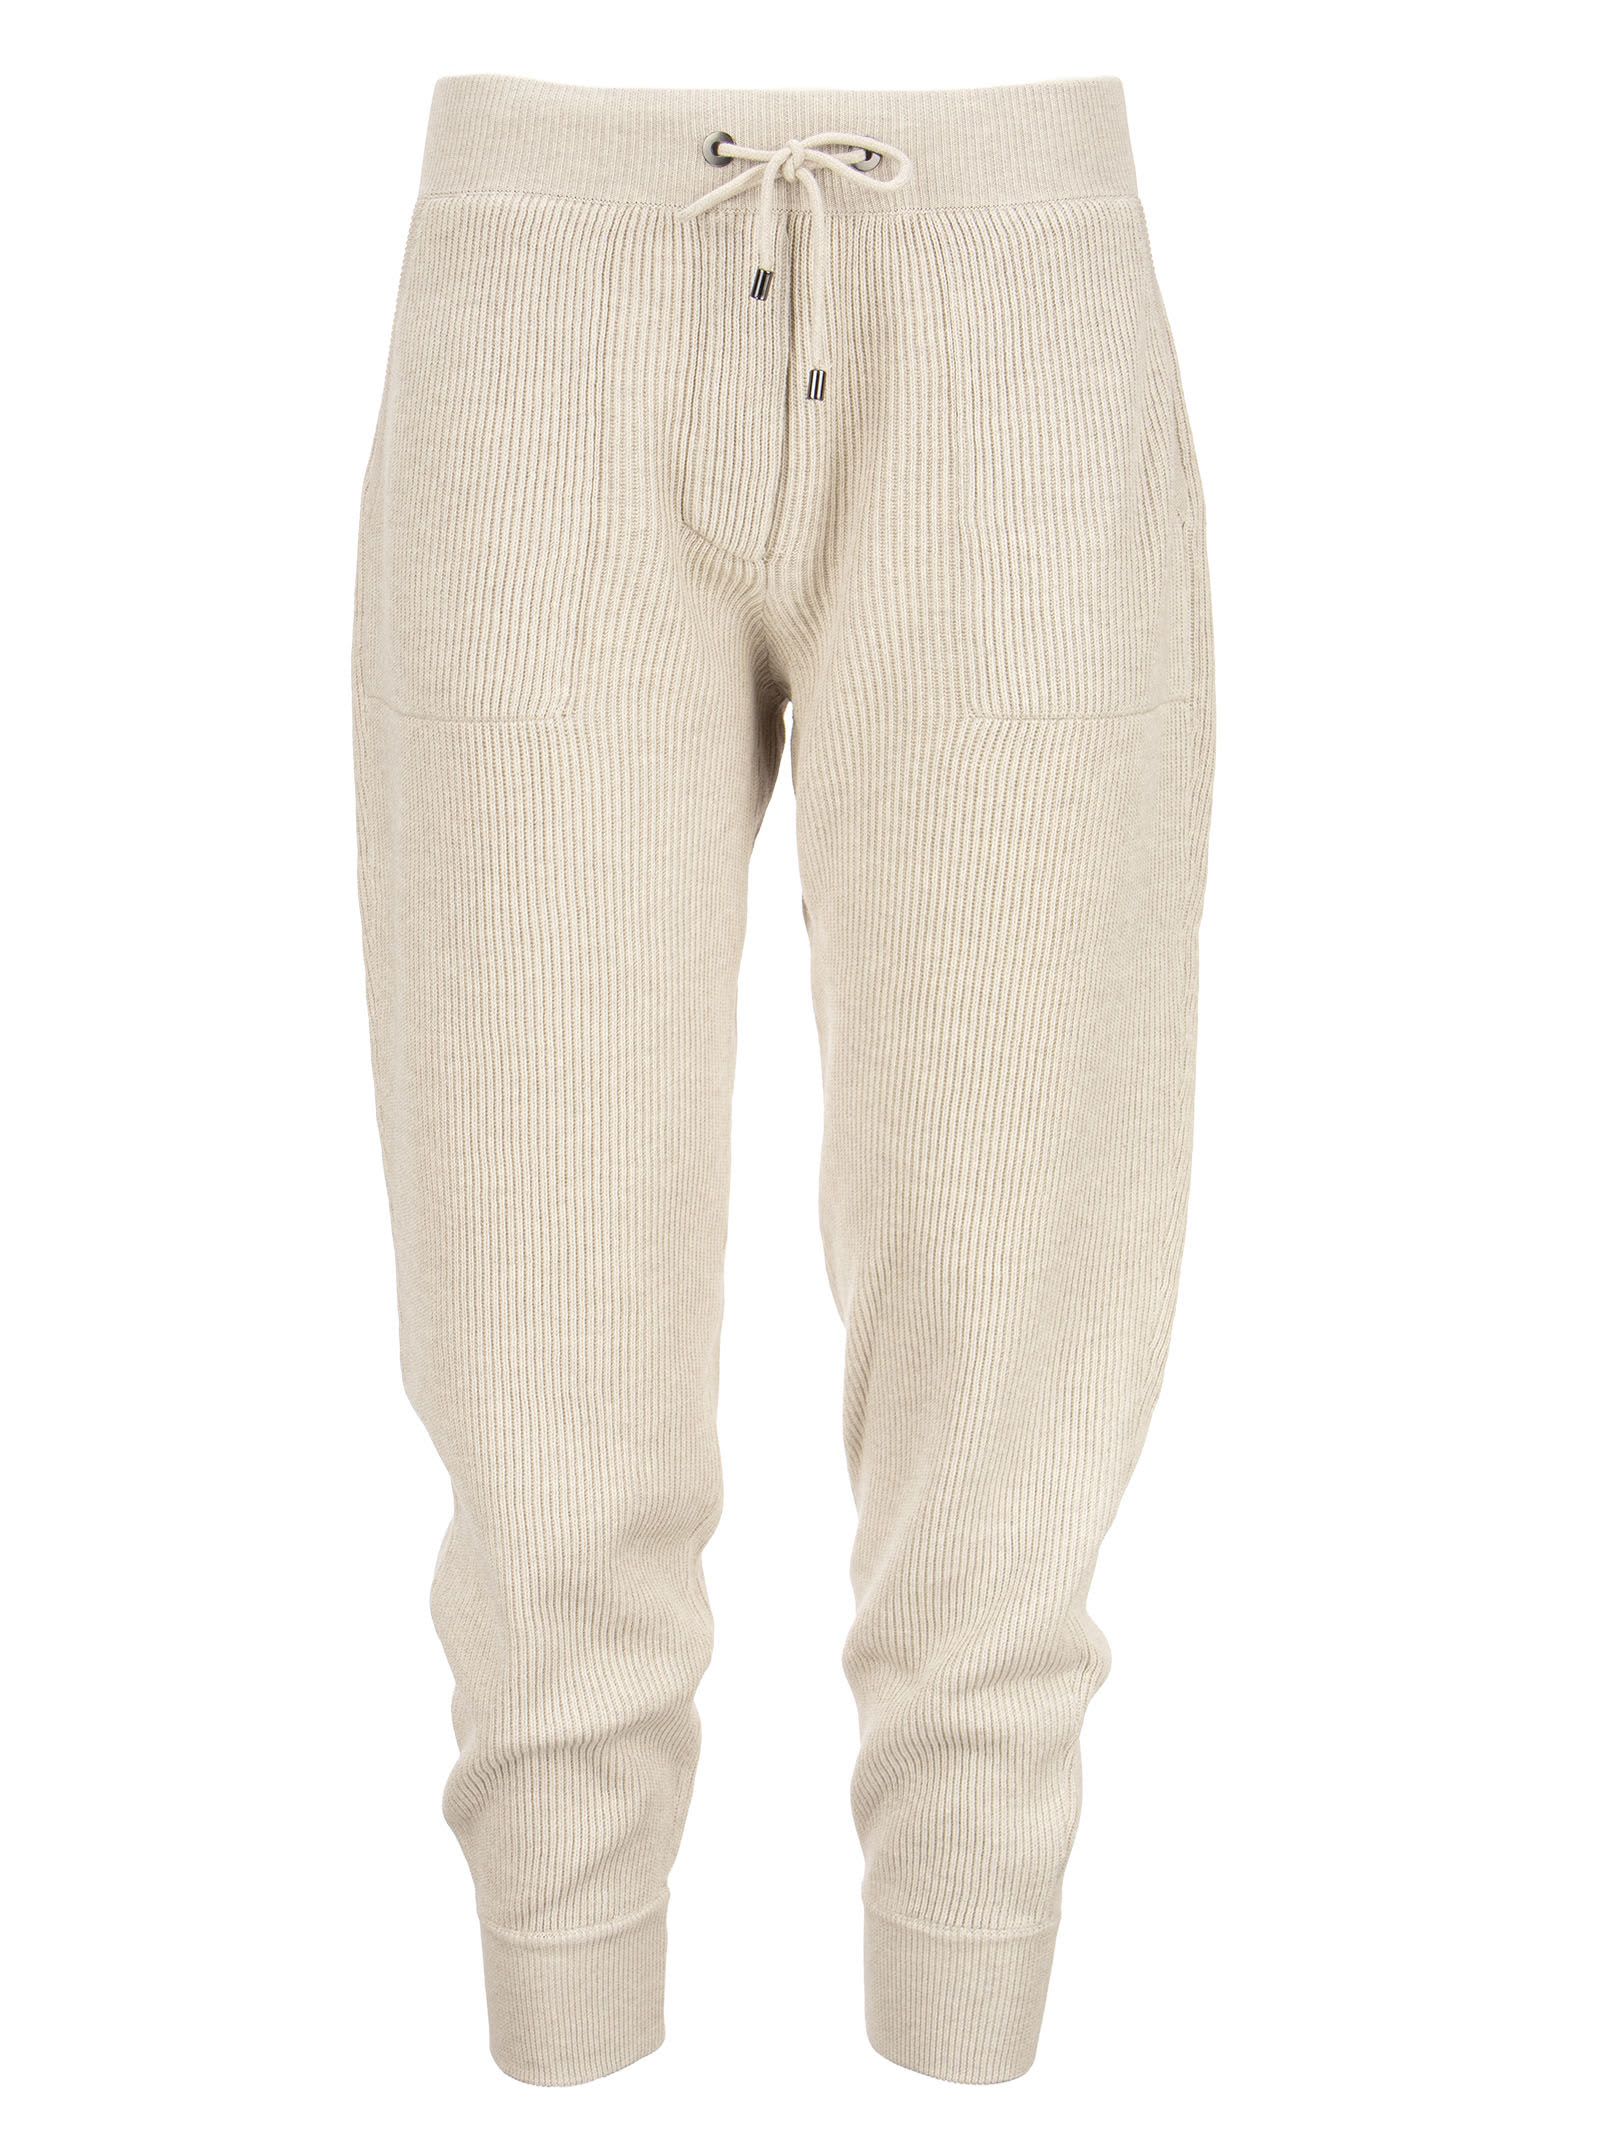 Brunello Cucinelli Cotton English Rib Knitted Trousers With Shiny Tab Pocket